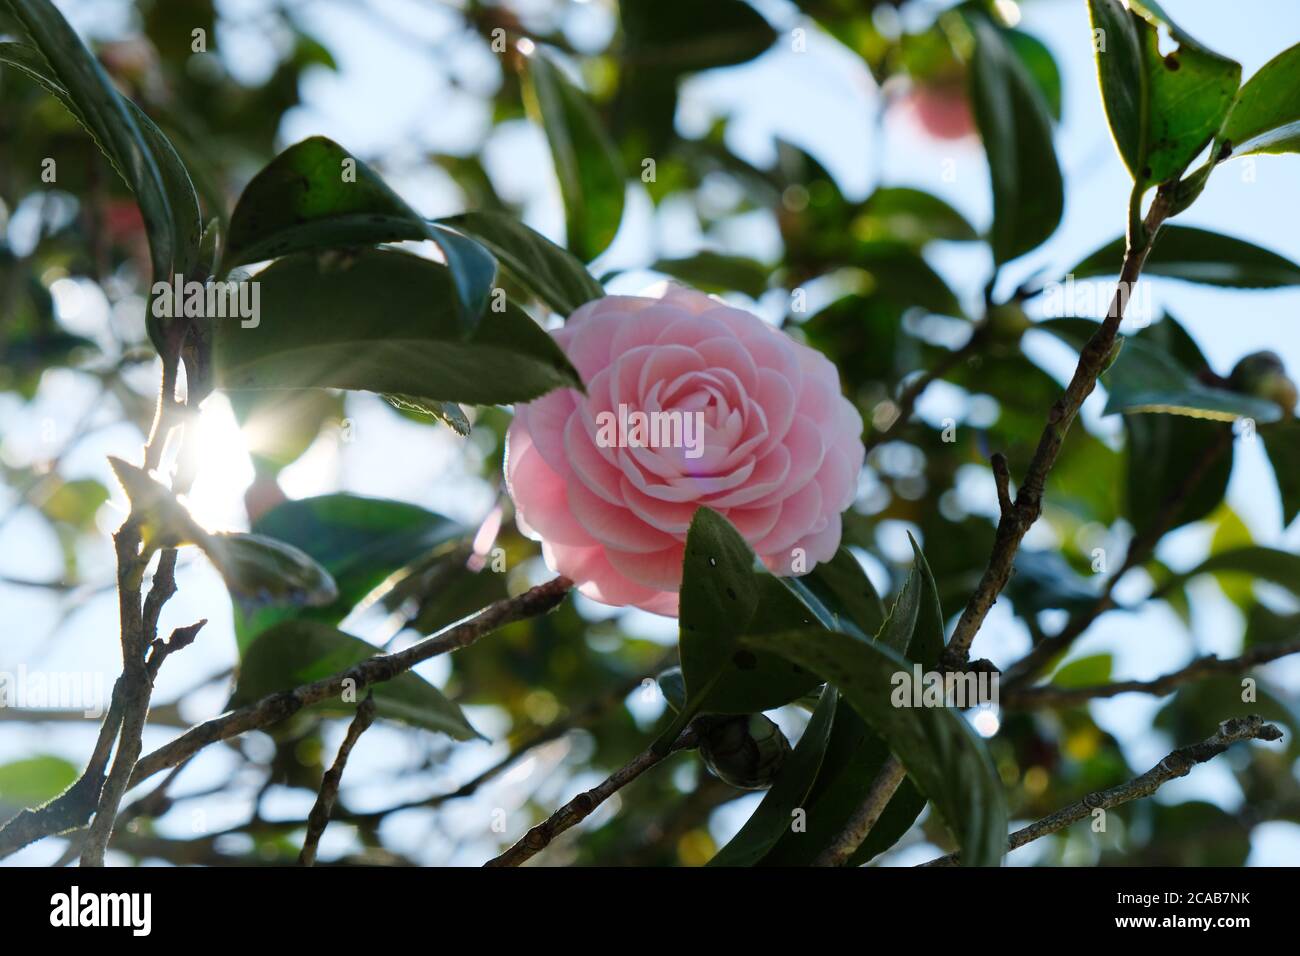 Camellia is a genus of flowering plants of Theaceae. Pink camellia represents eternal love and romance. Its a highly respected flower in Japan. Stock Photo